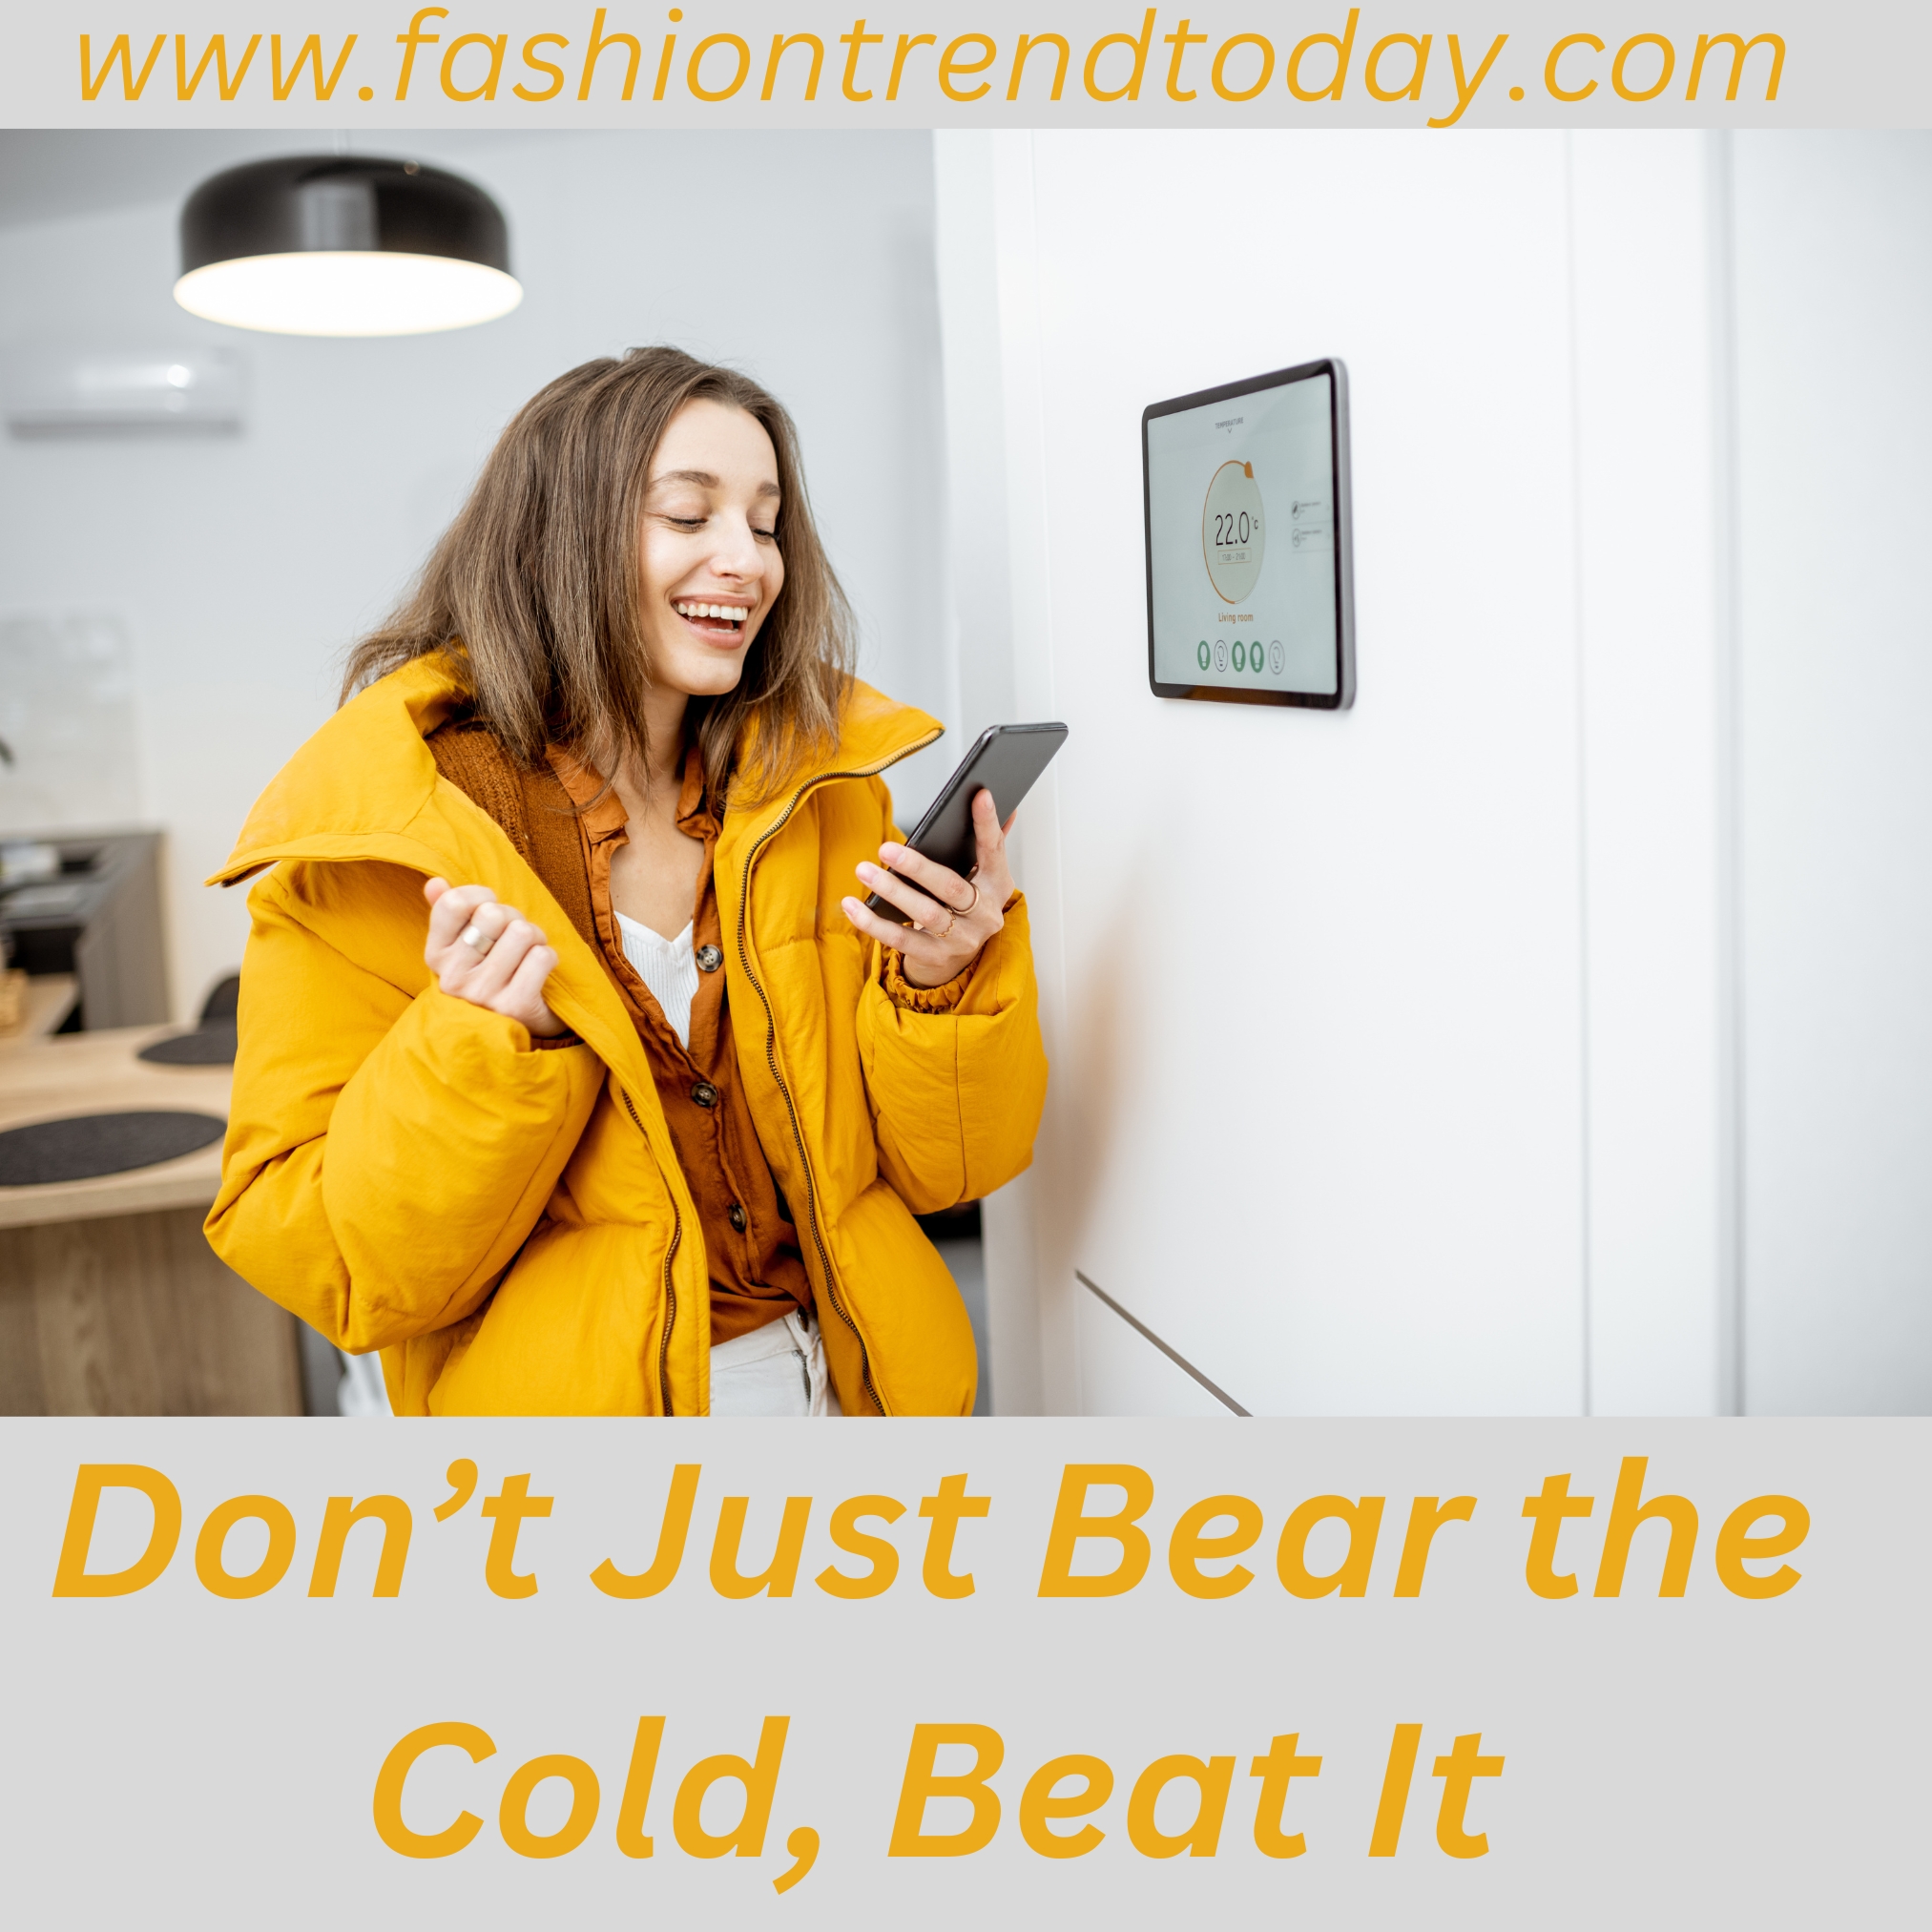 Don’t Just Bear the Cold, Beat It.